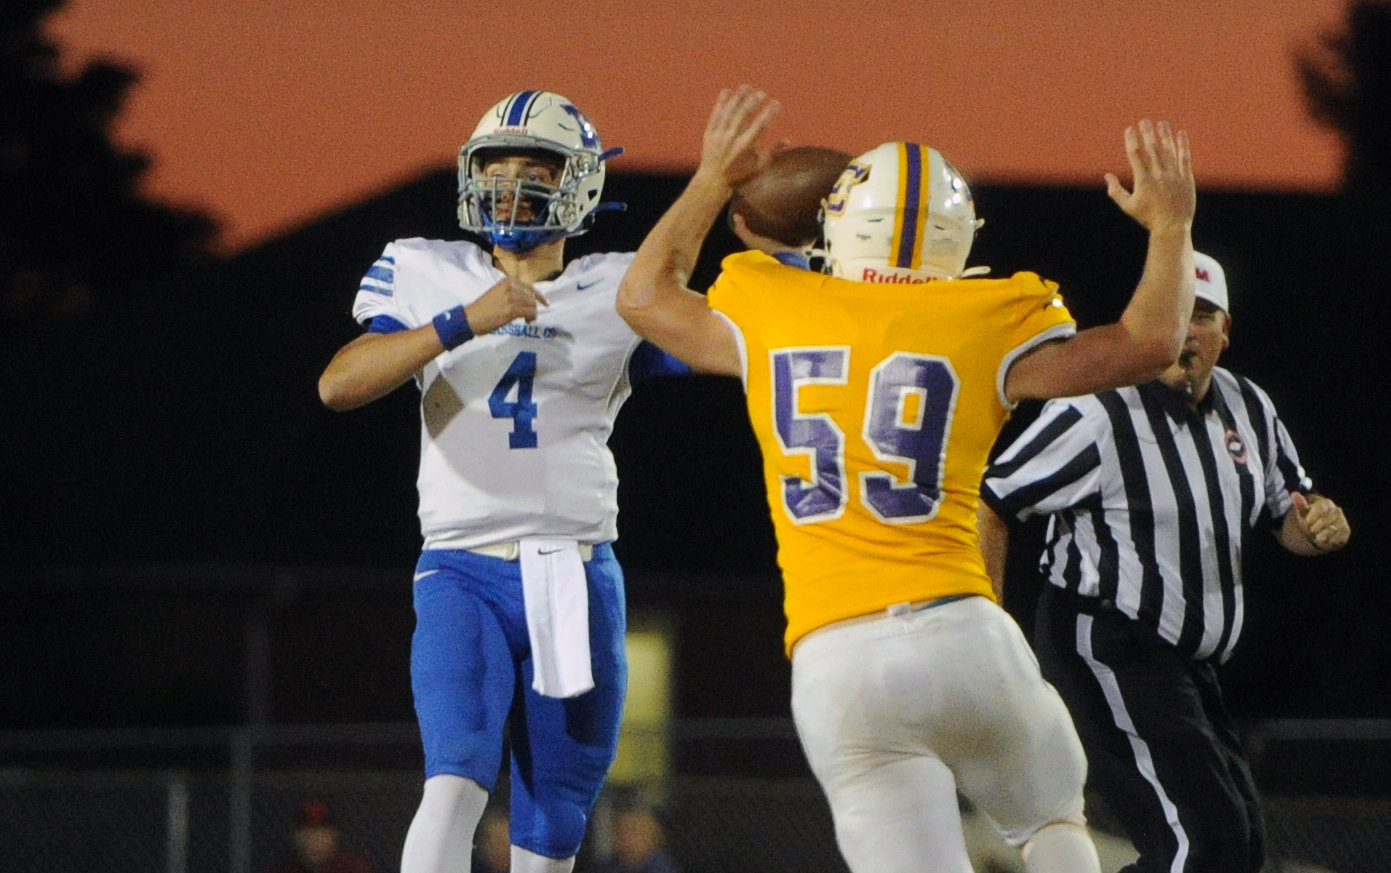 Silas Teat completed 7-of-9 passes for 162 yards and four touchdowns against Glencliff.